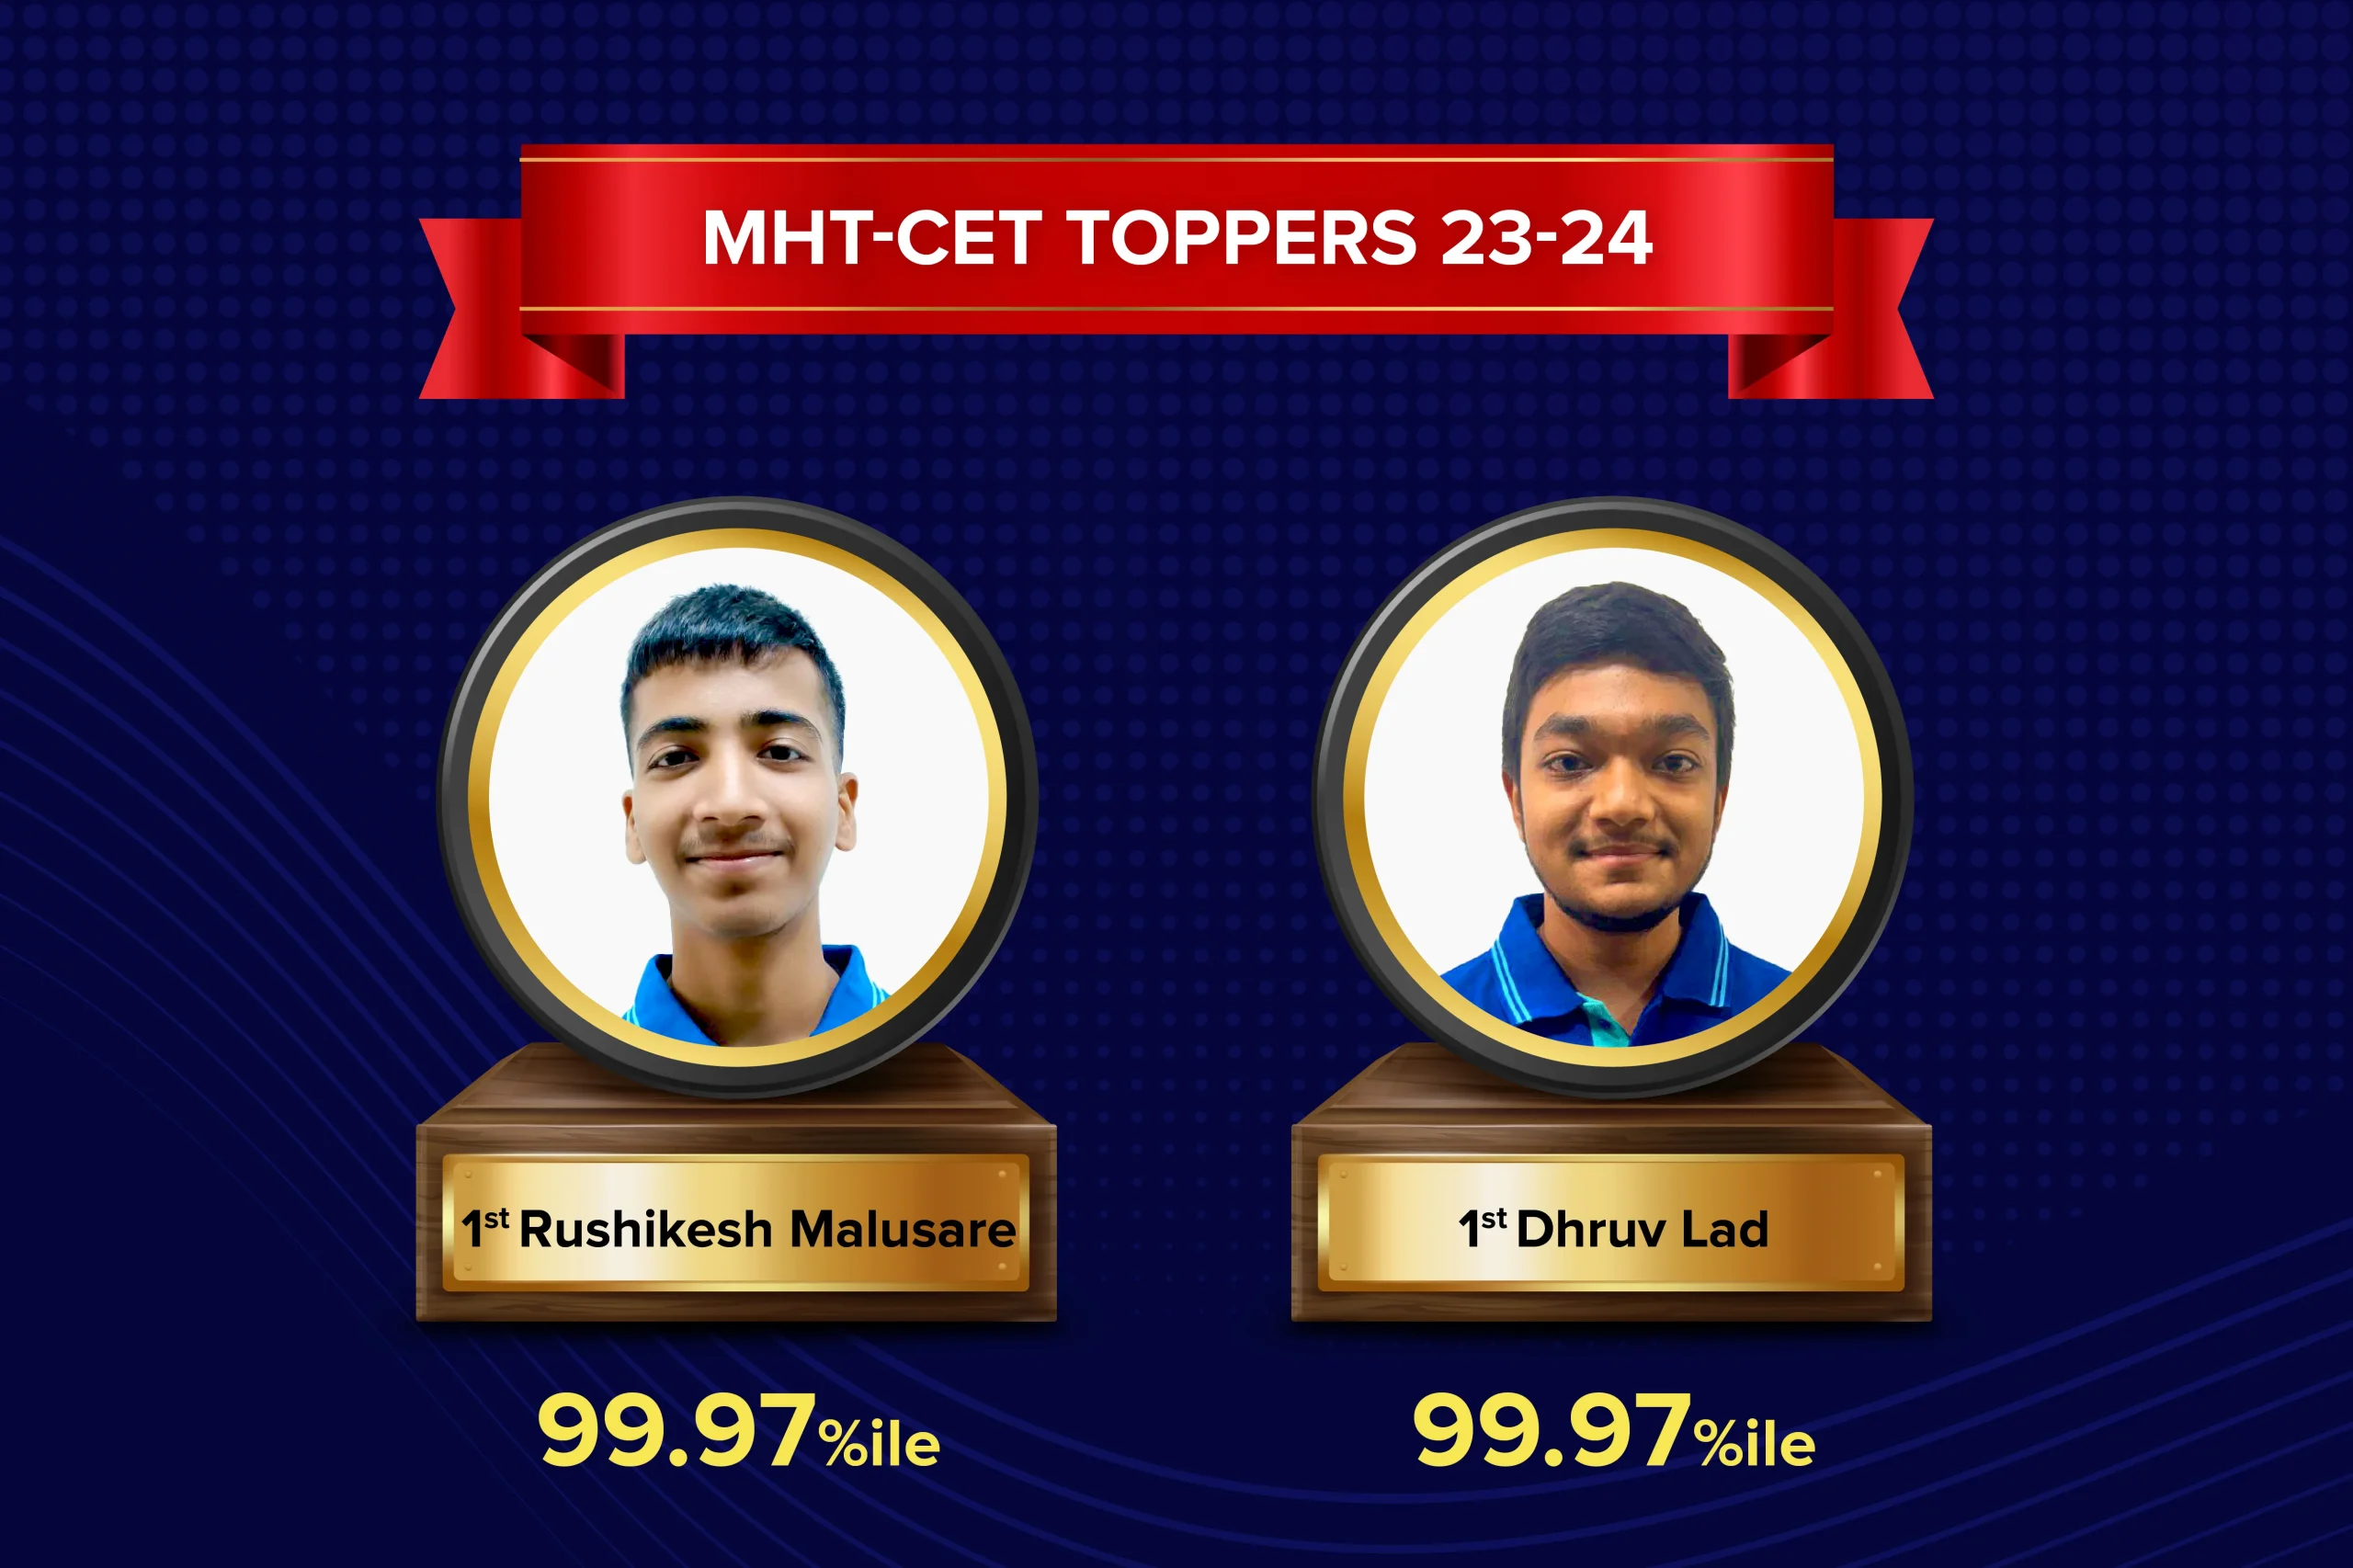 MHT-CET Toppers 2023-24